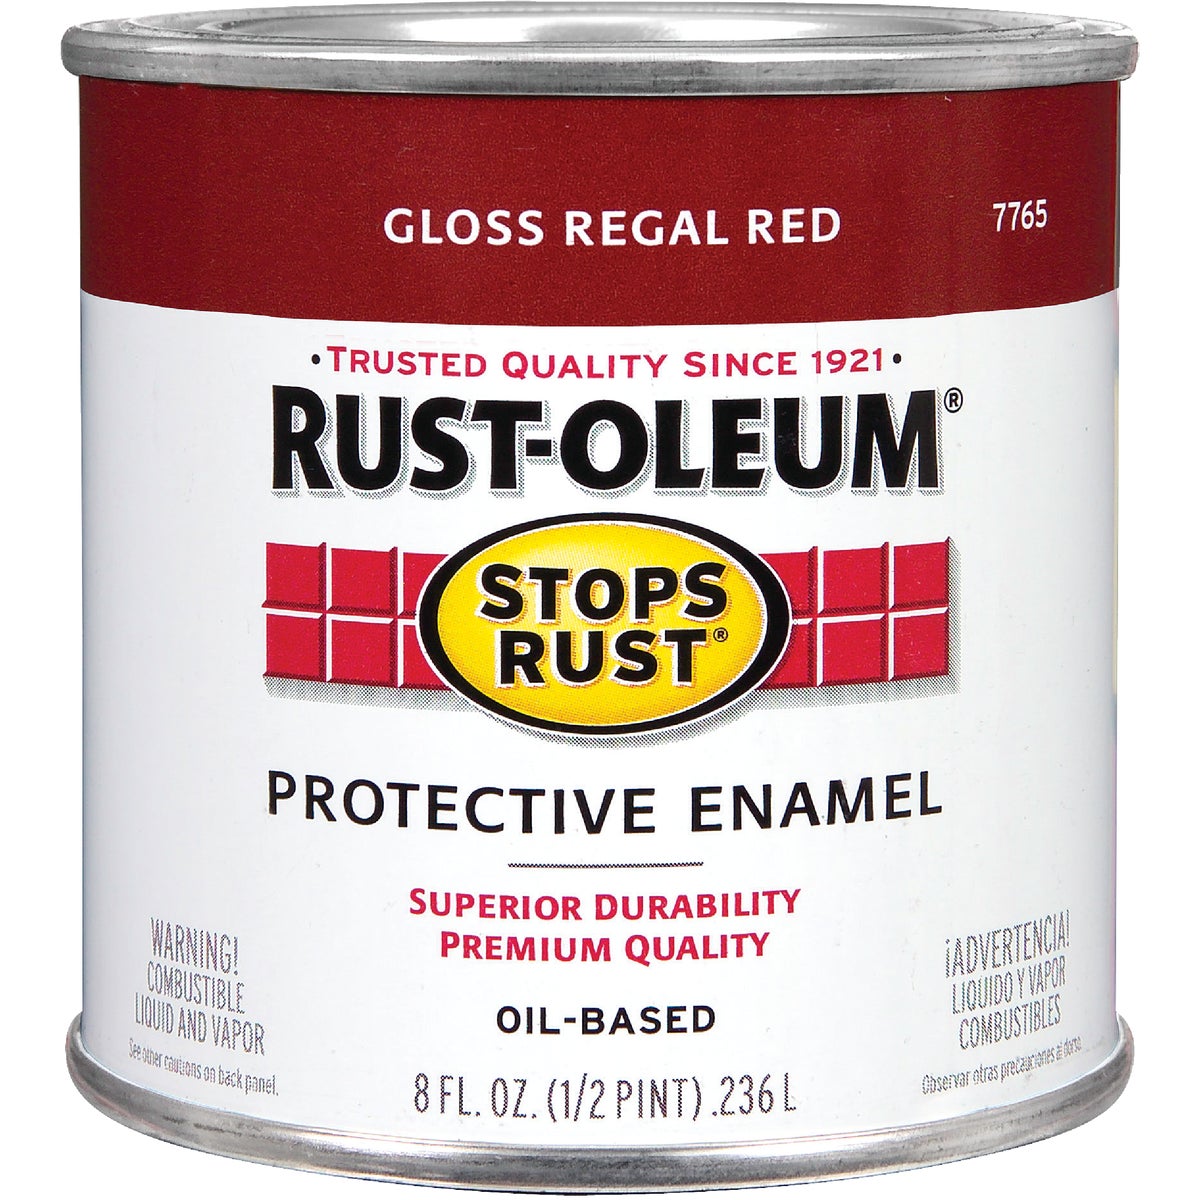 Rust-Oleum Stops Rust Oil Based Gloss Protective Rust Control Enamel, Regal Red, 1/2 Pt.